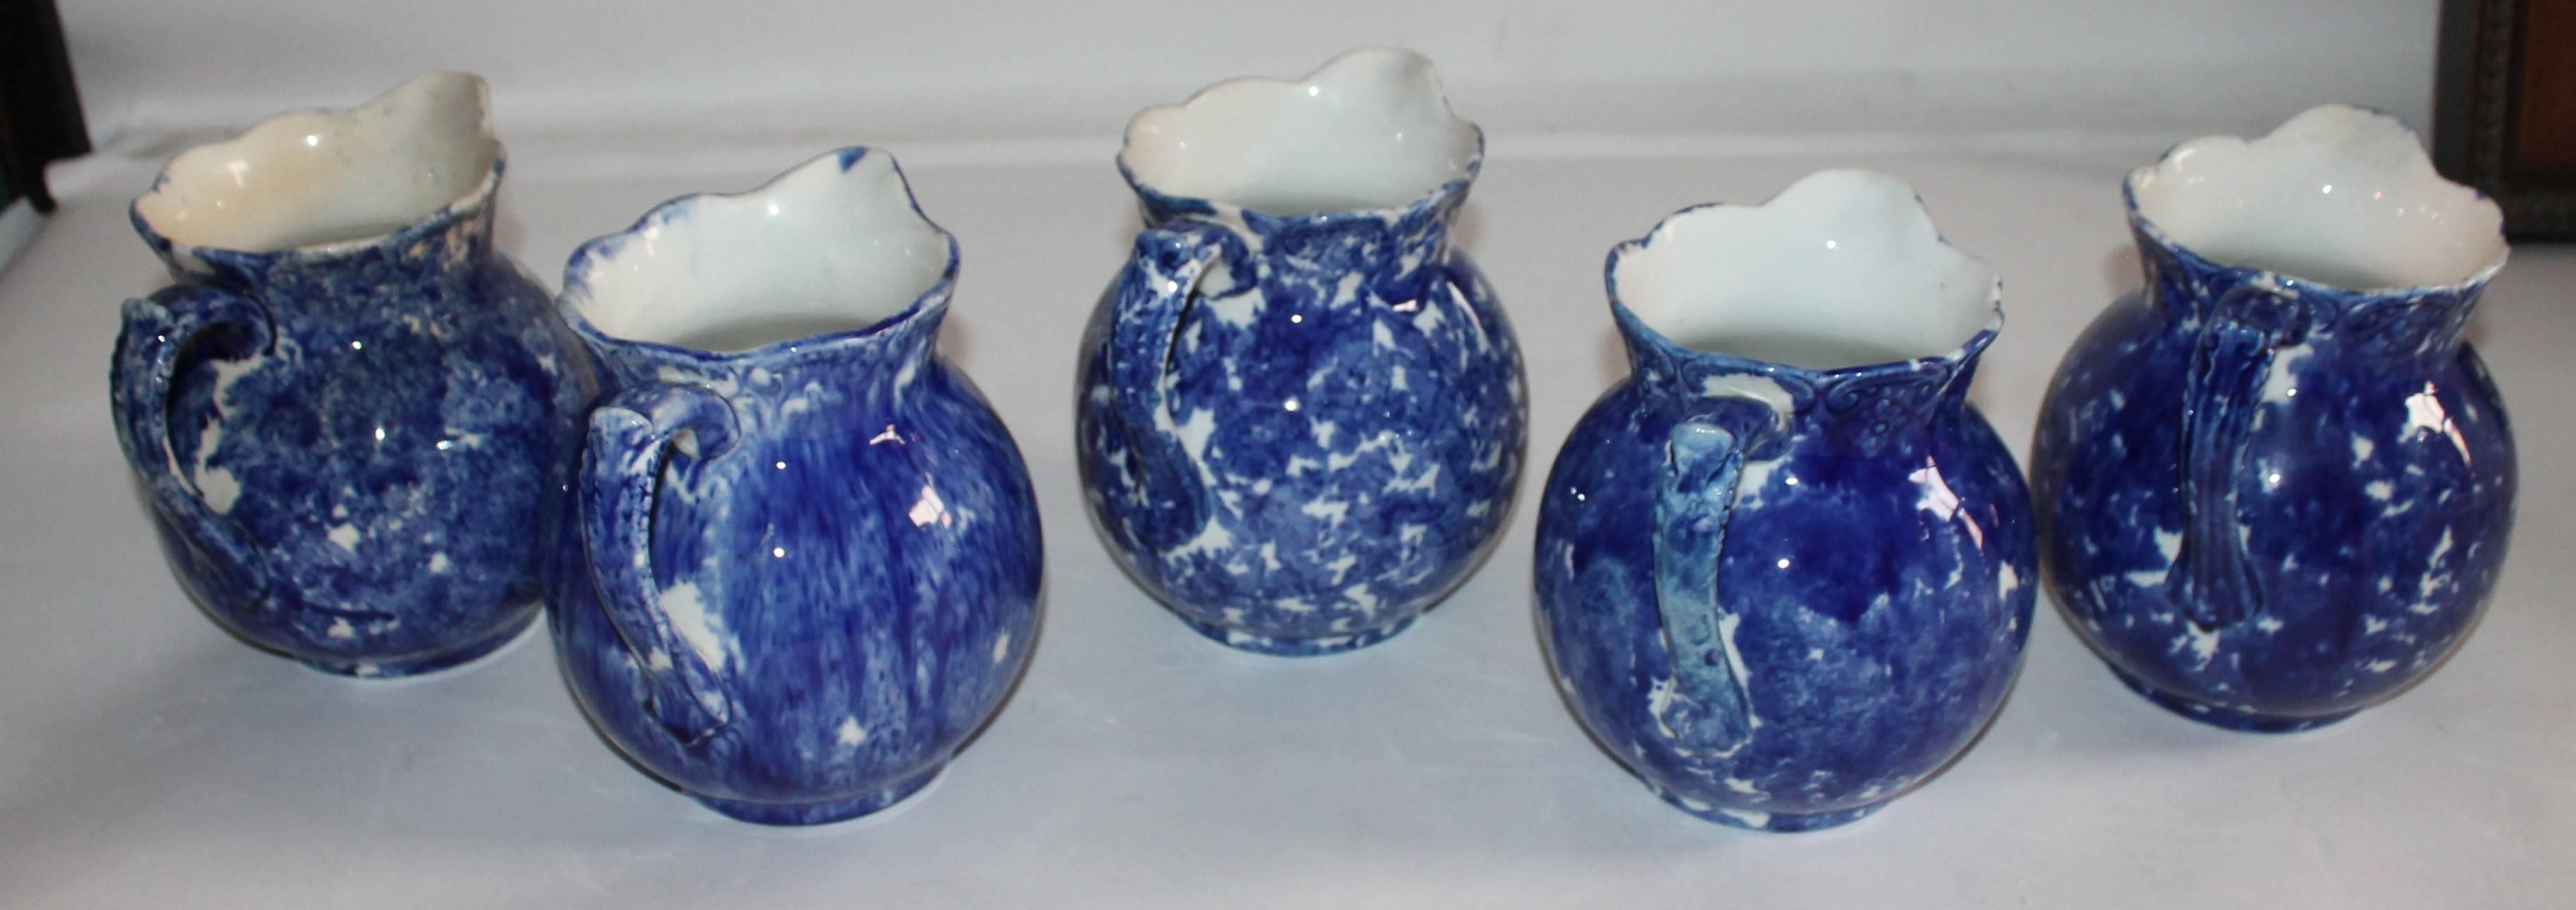 Spongeware Pitchers / Collection of Five, 19th Century For Sale 2